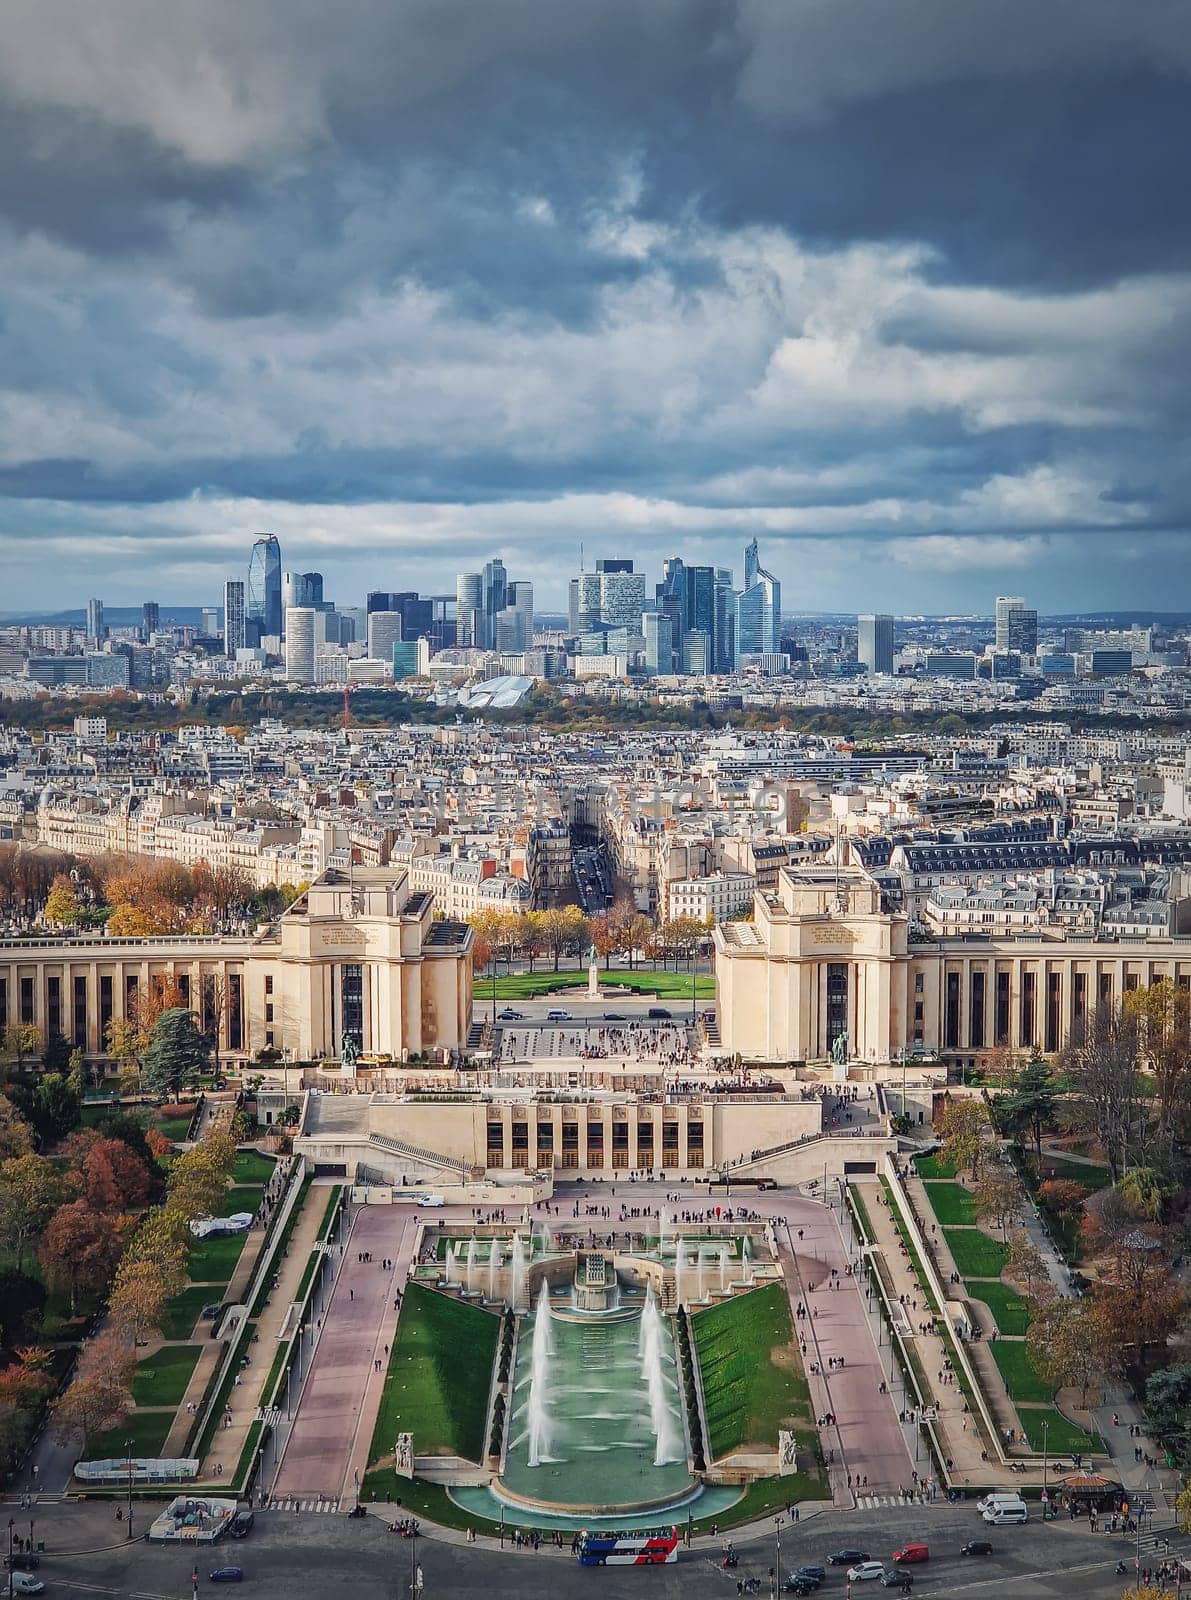 Sightseeing aerial view of the Trocadero area and La Defense metropolitan district at the horizon in Paris, France. Beautiful autumn season colors, vertical background by psychoshadow